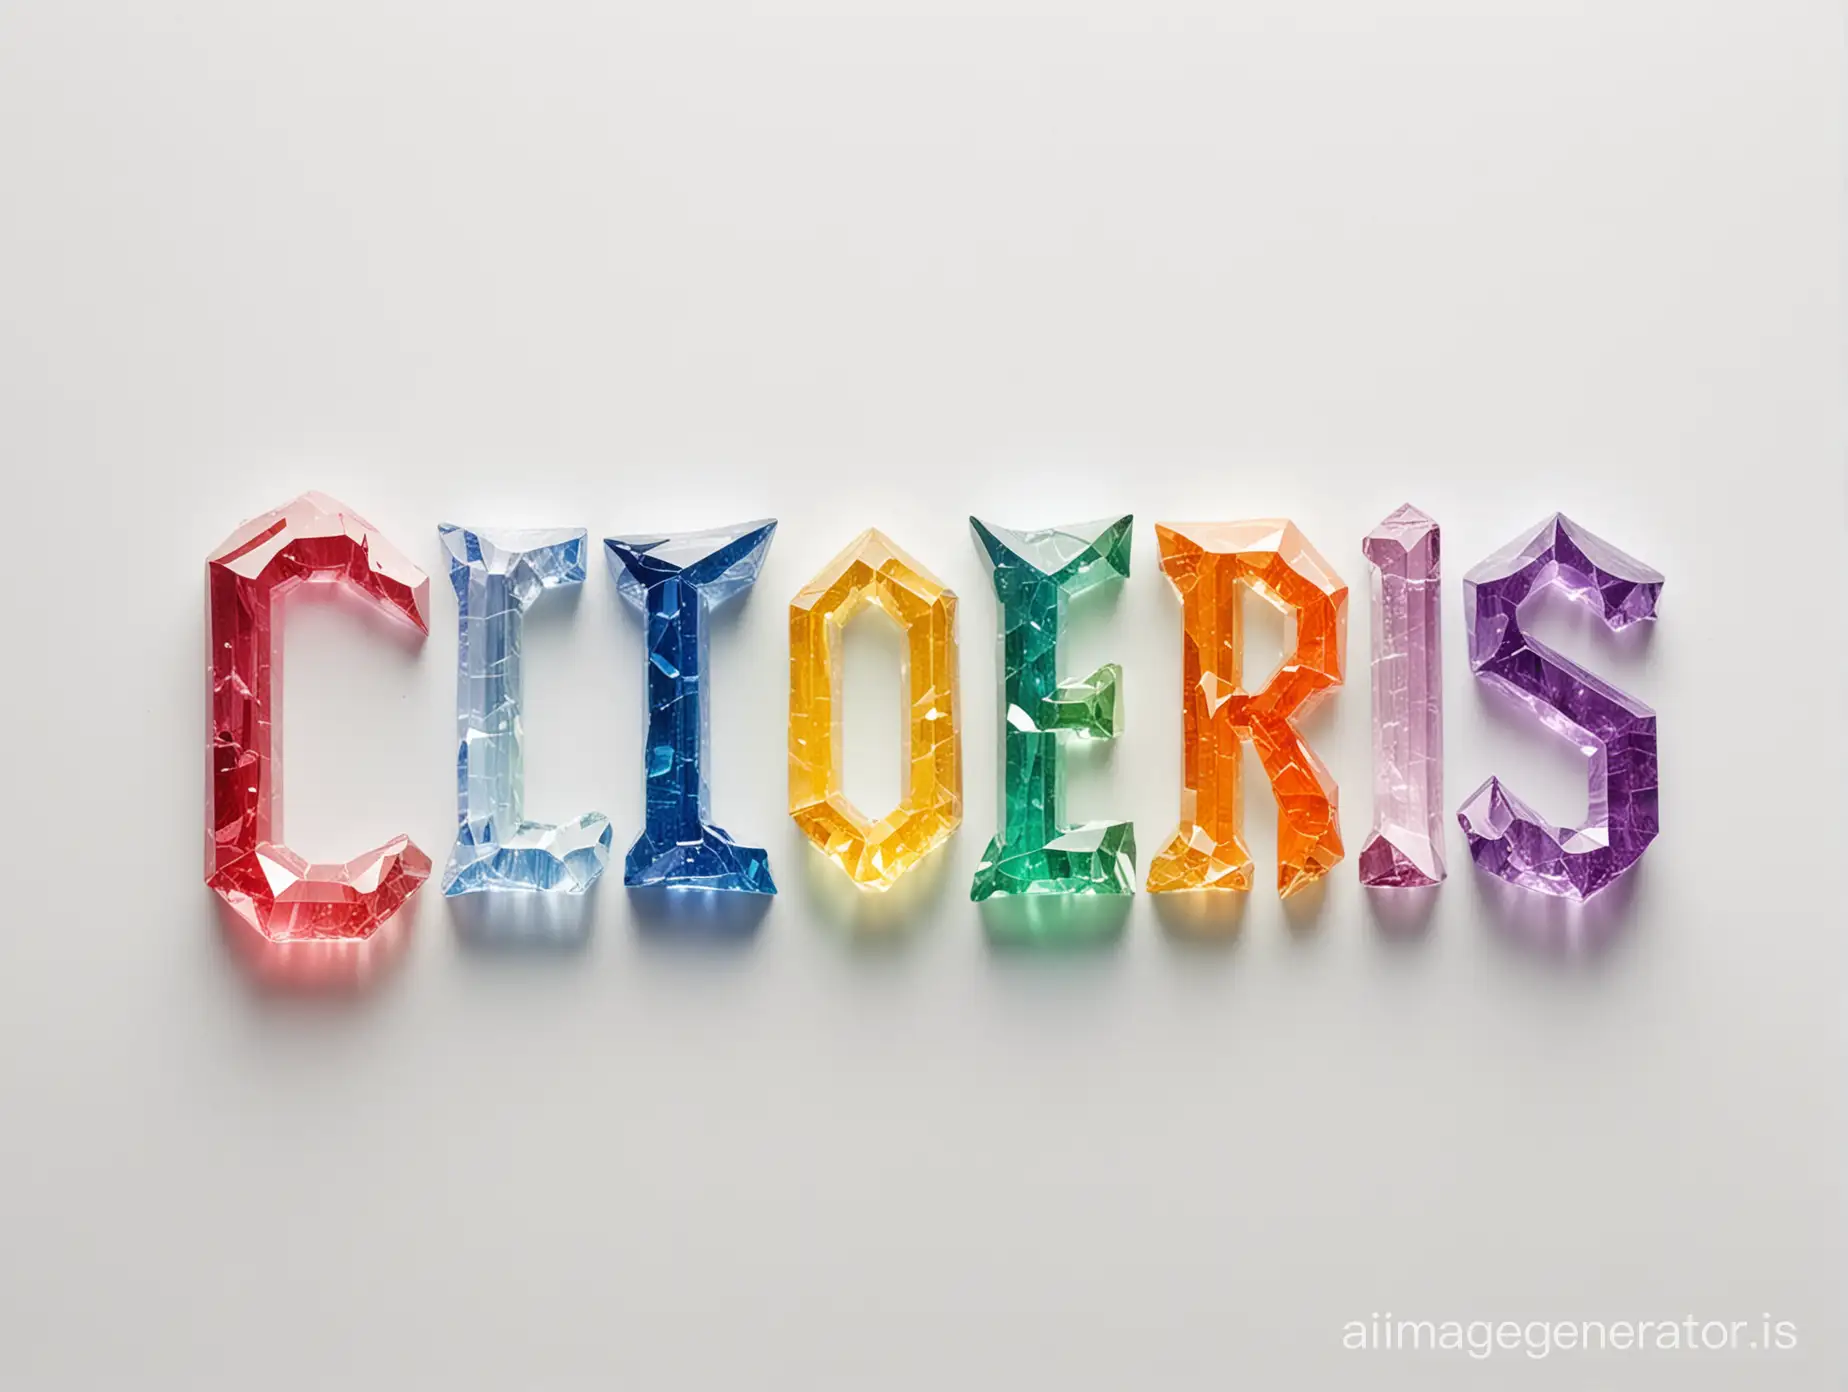 Vibrant-Colors-Resembling-Crystal-Shapes-on-a-White-Background